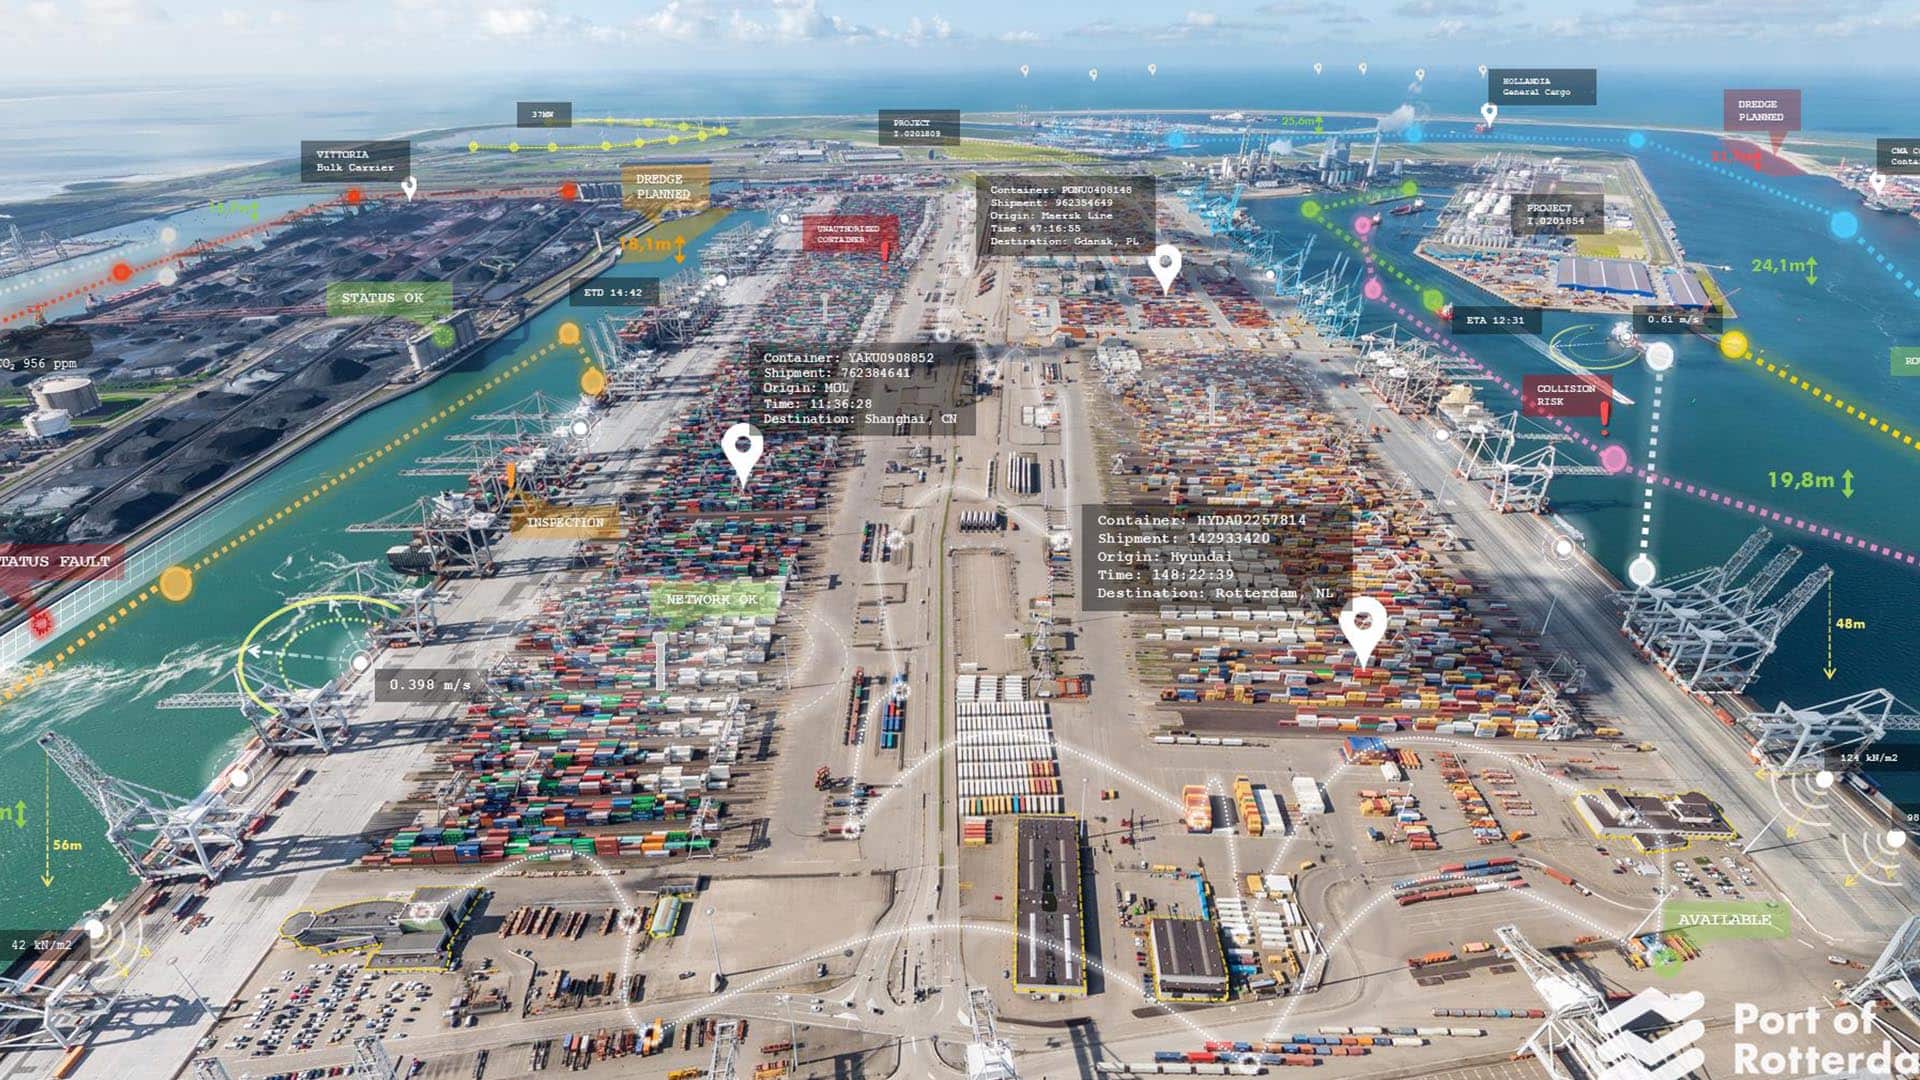 Imperial Tien Oordeel The Largest Port in Europe Enlists Location Technology to Host Self-Sailing  Ships